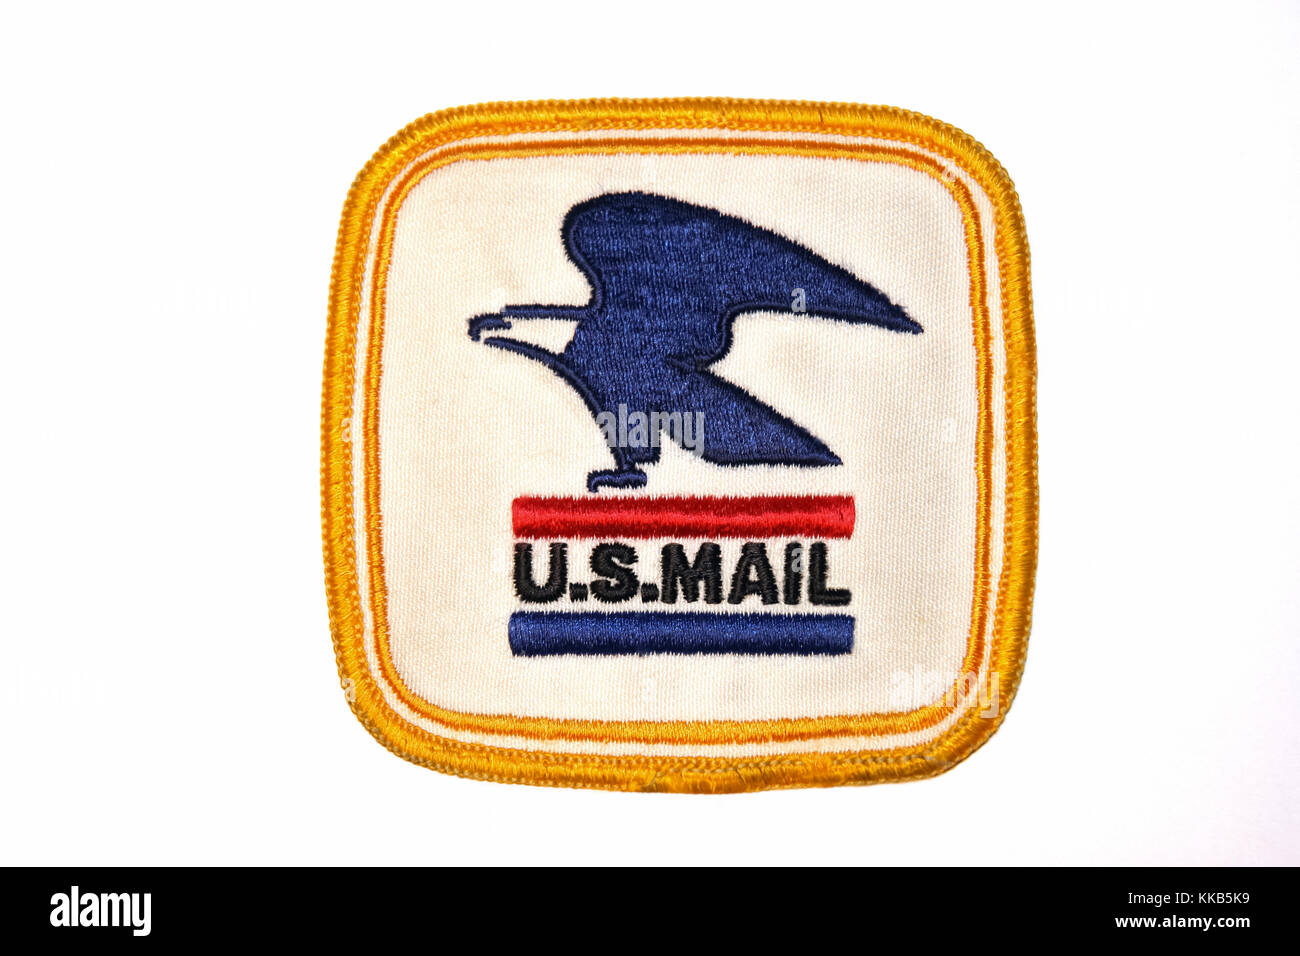 Historical United States Mail Eagle Emblem Patch that letter carriers wore on their uniforms (1971-1991). Stock Photo